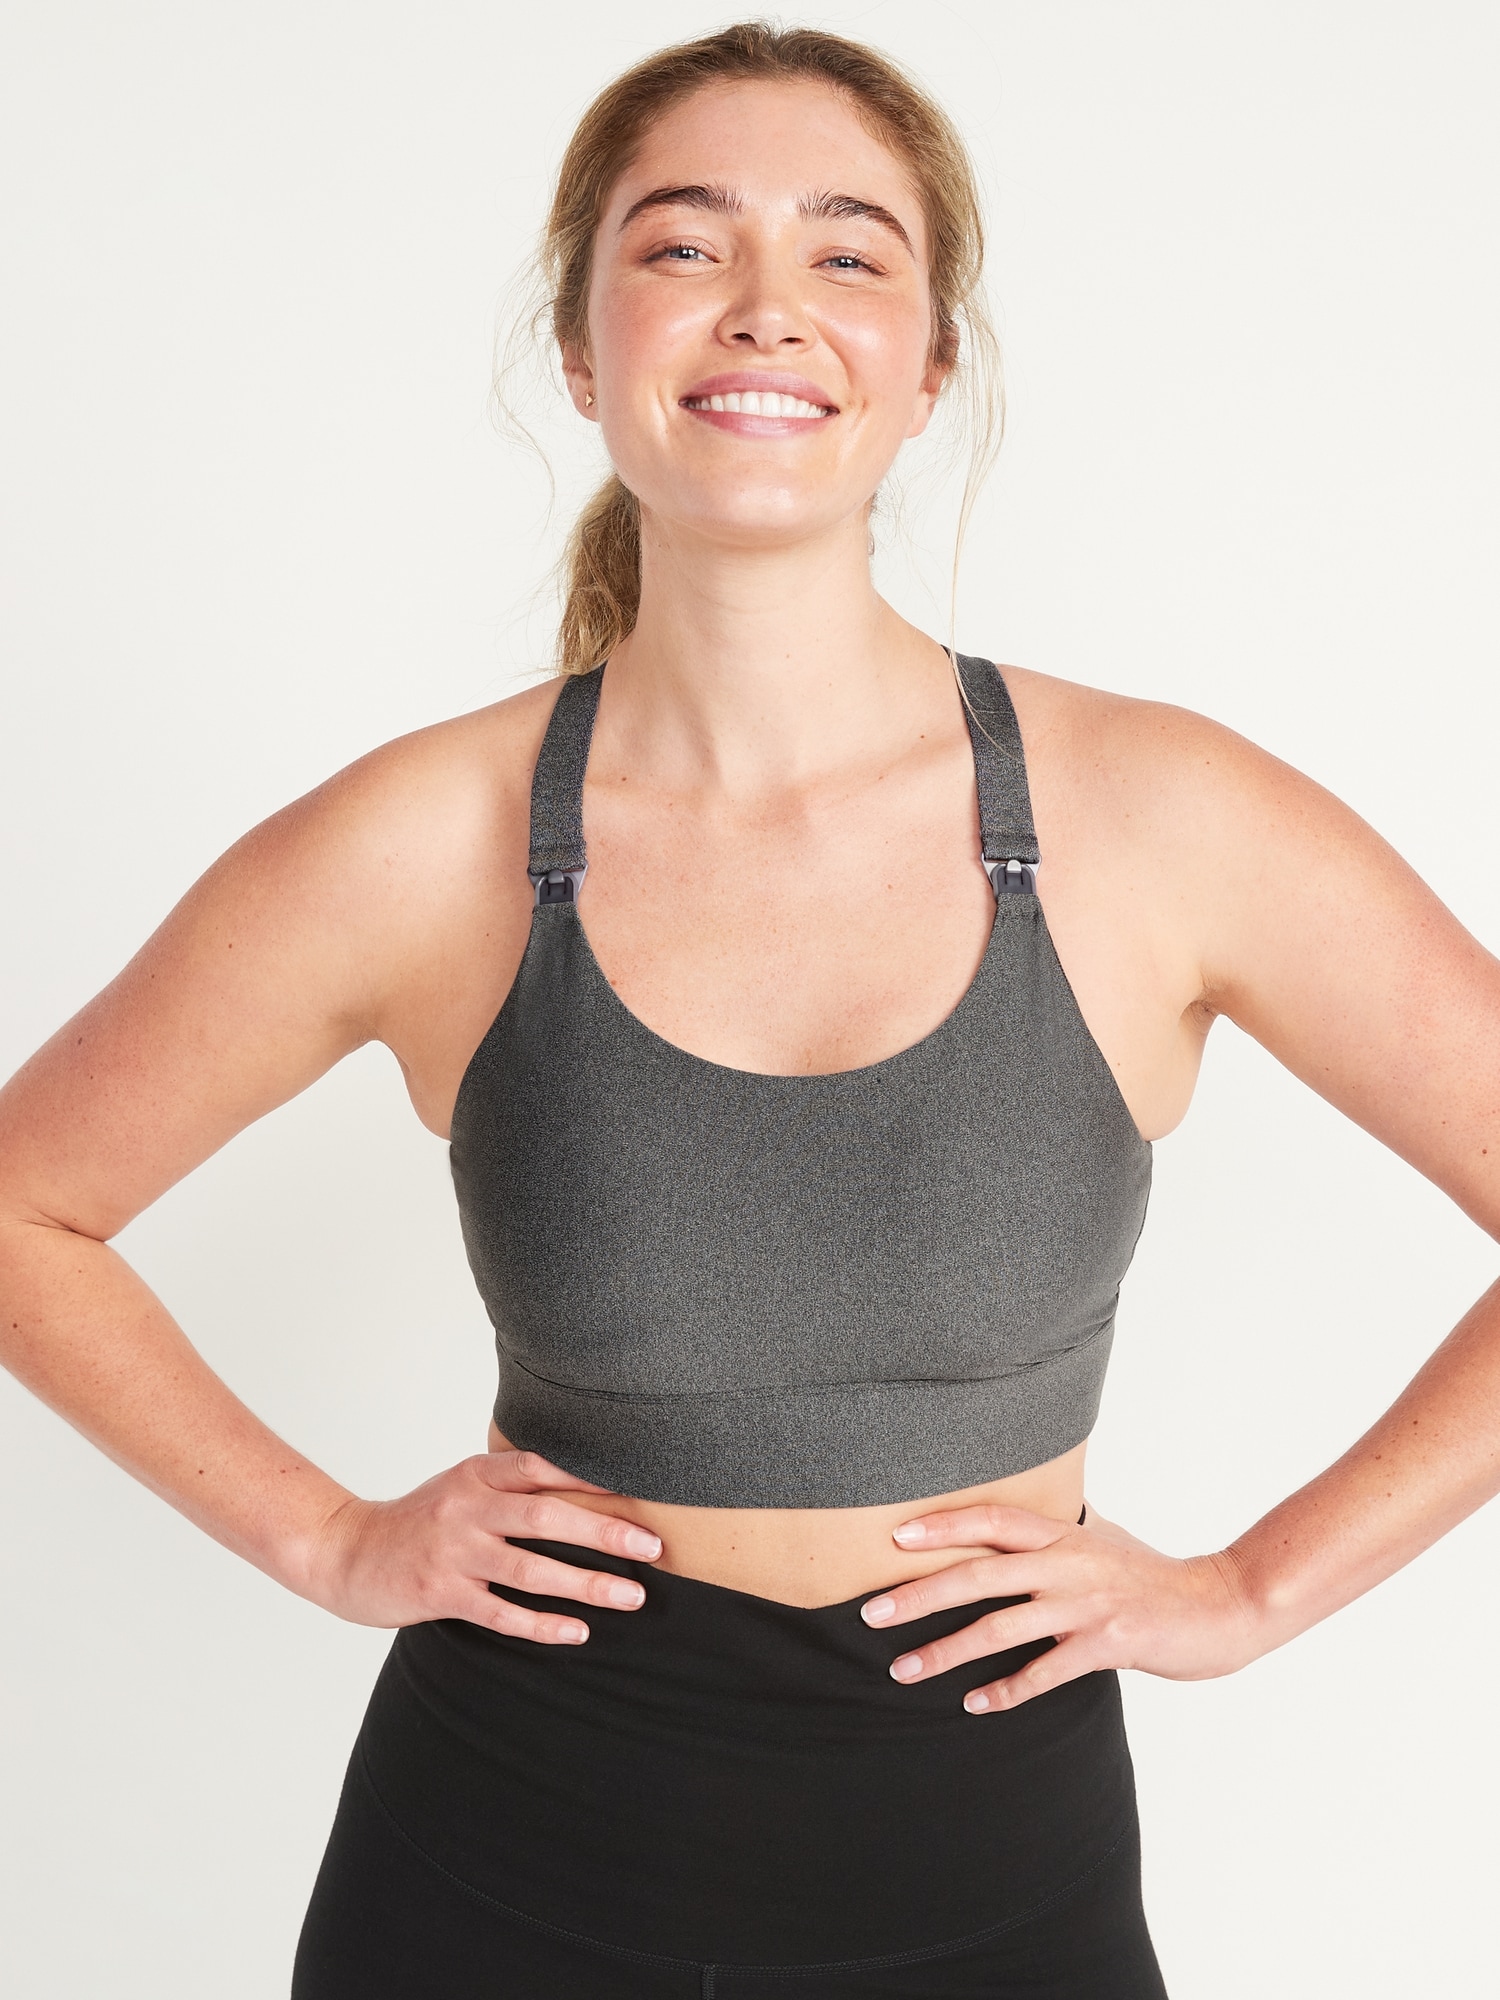 Multifunctional Breastfeeding Sports Bras for Active Lifestyles - Lovemere  - Best Online Maternity Clothing Store - Medium